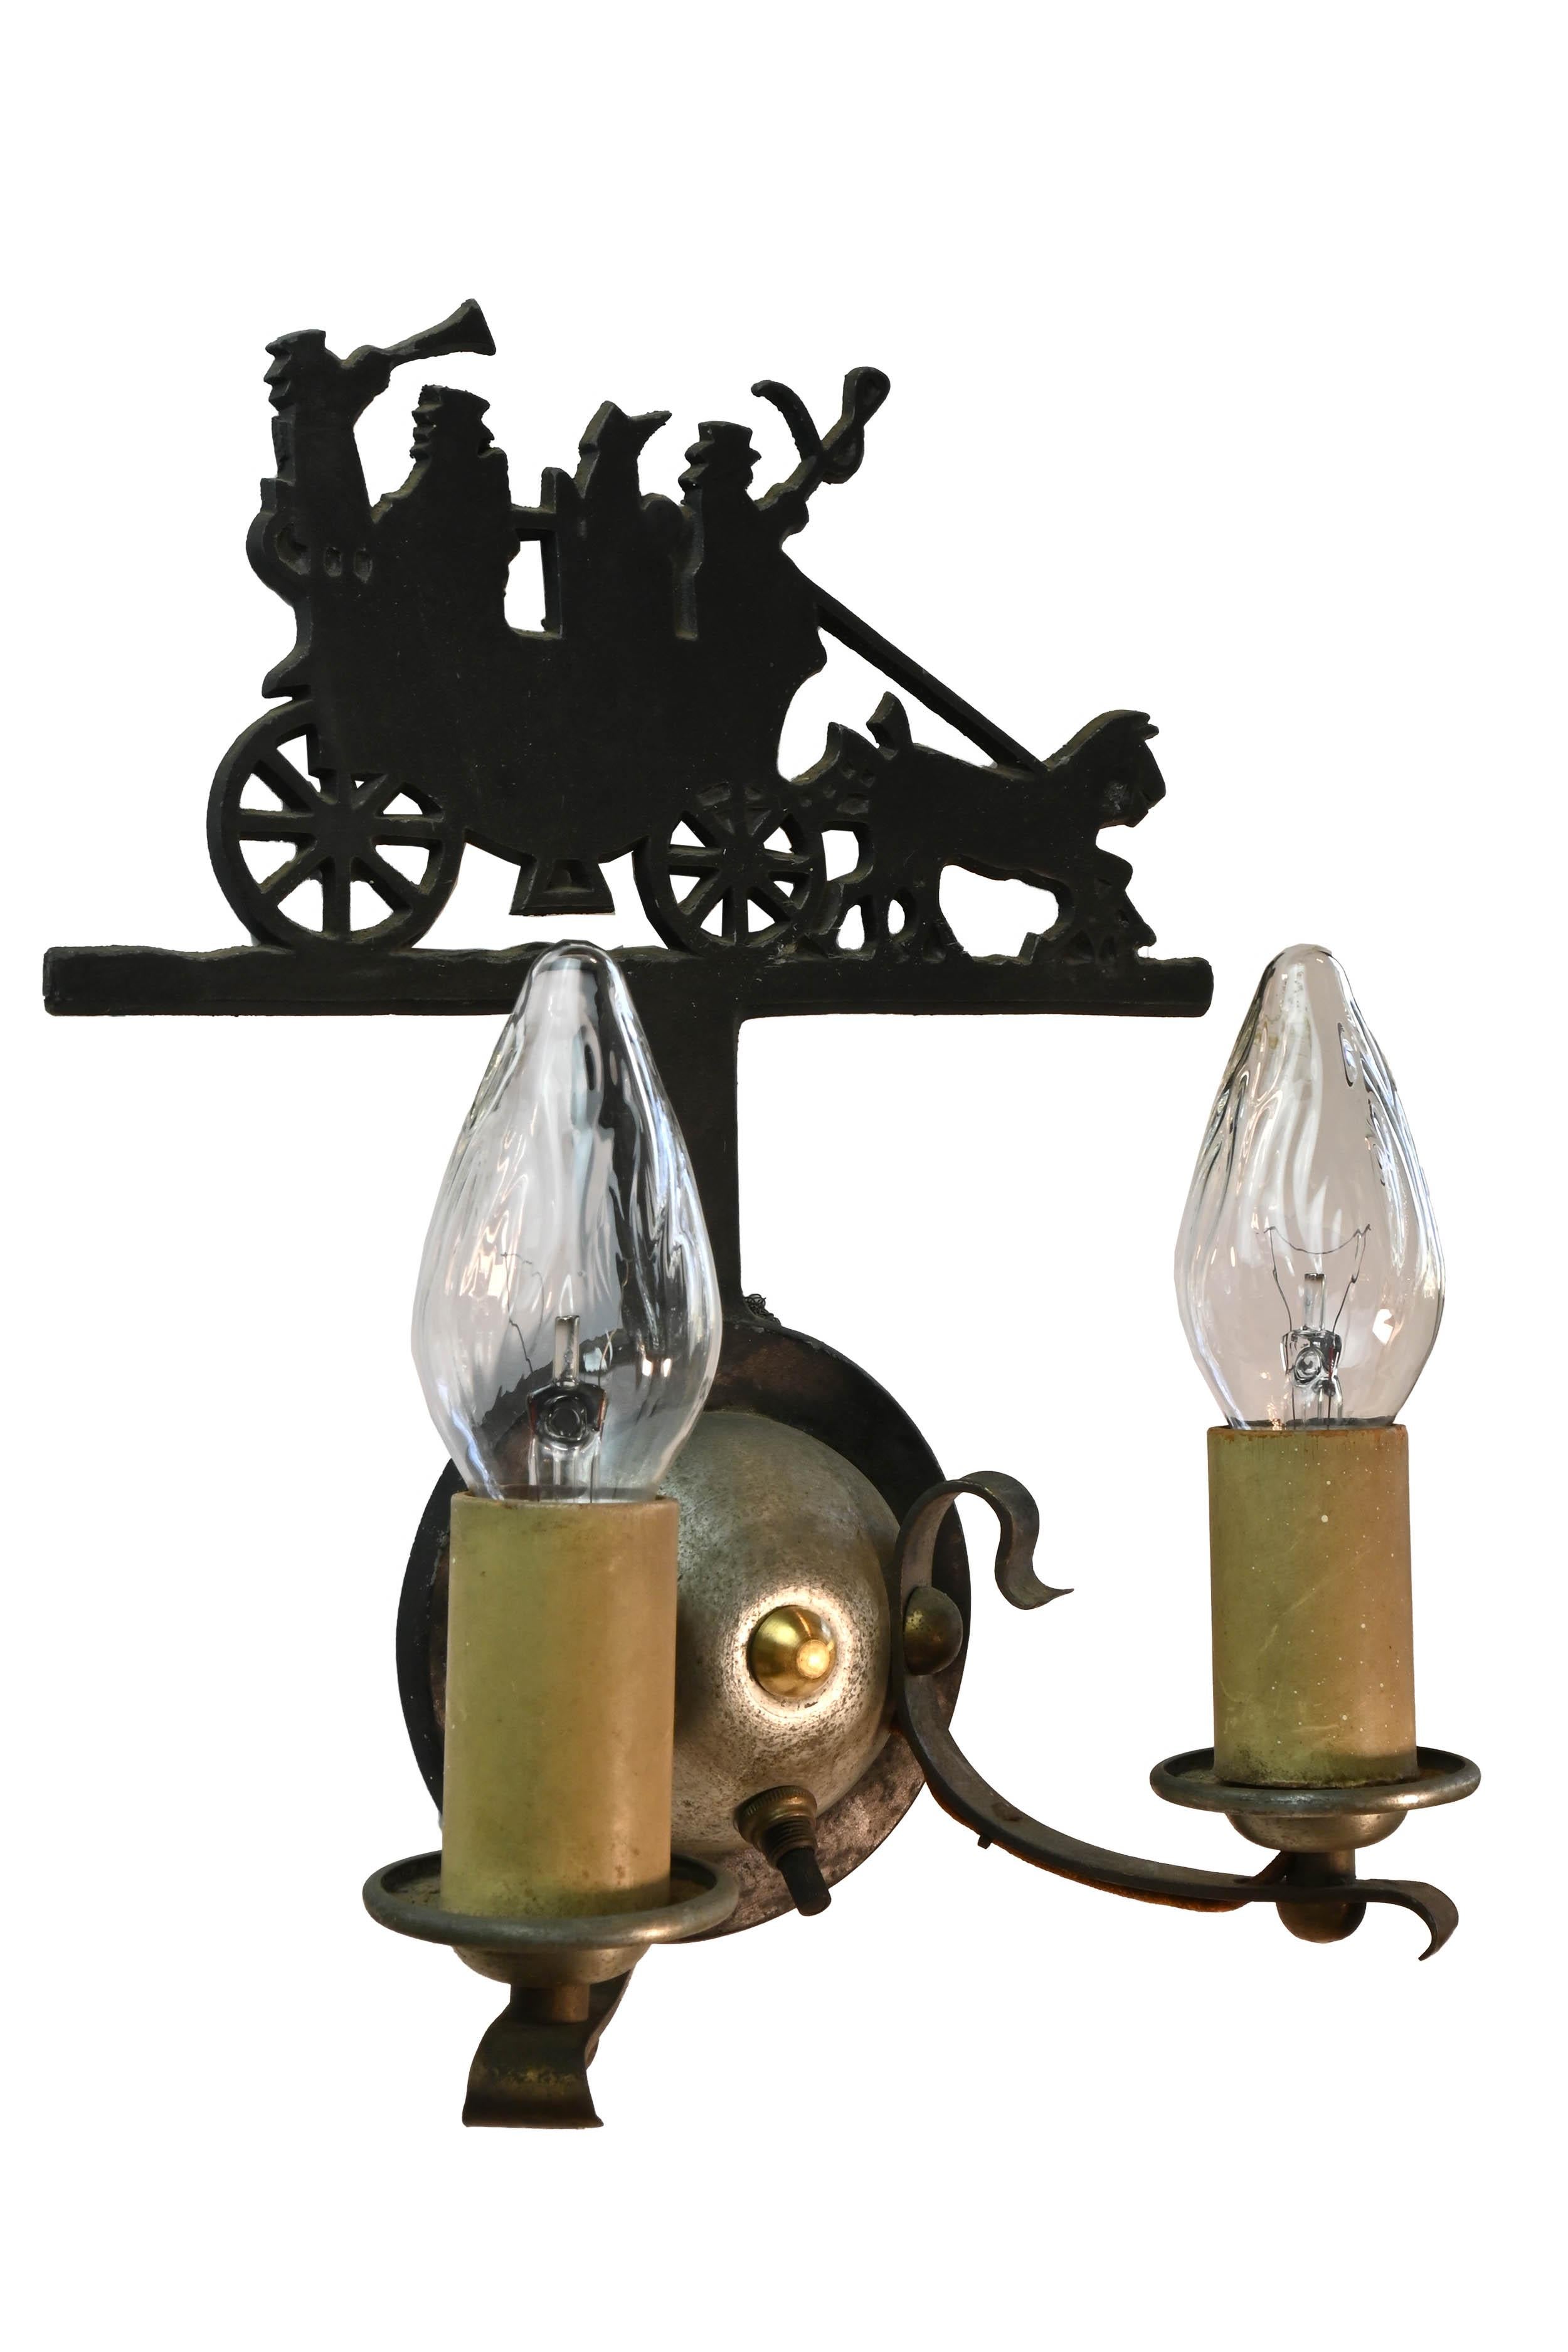 Two candle sconce illuminating a cheerful horse drawn carriage scene. 

  

circa 1920s
Condition: Age consistent “Very Good”
Material: Cast iron, cast and spun aluminum 
Finish: Original finish
Country of origin: USA
Illumination: two